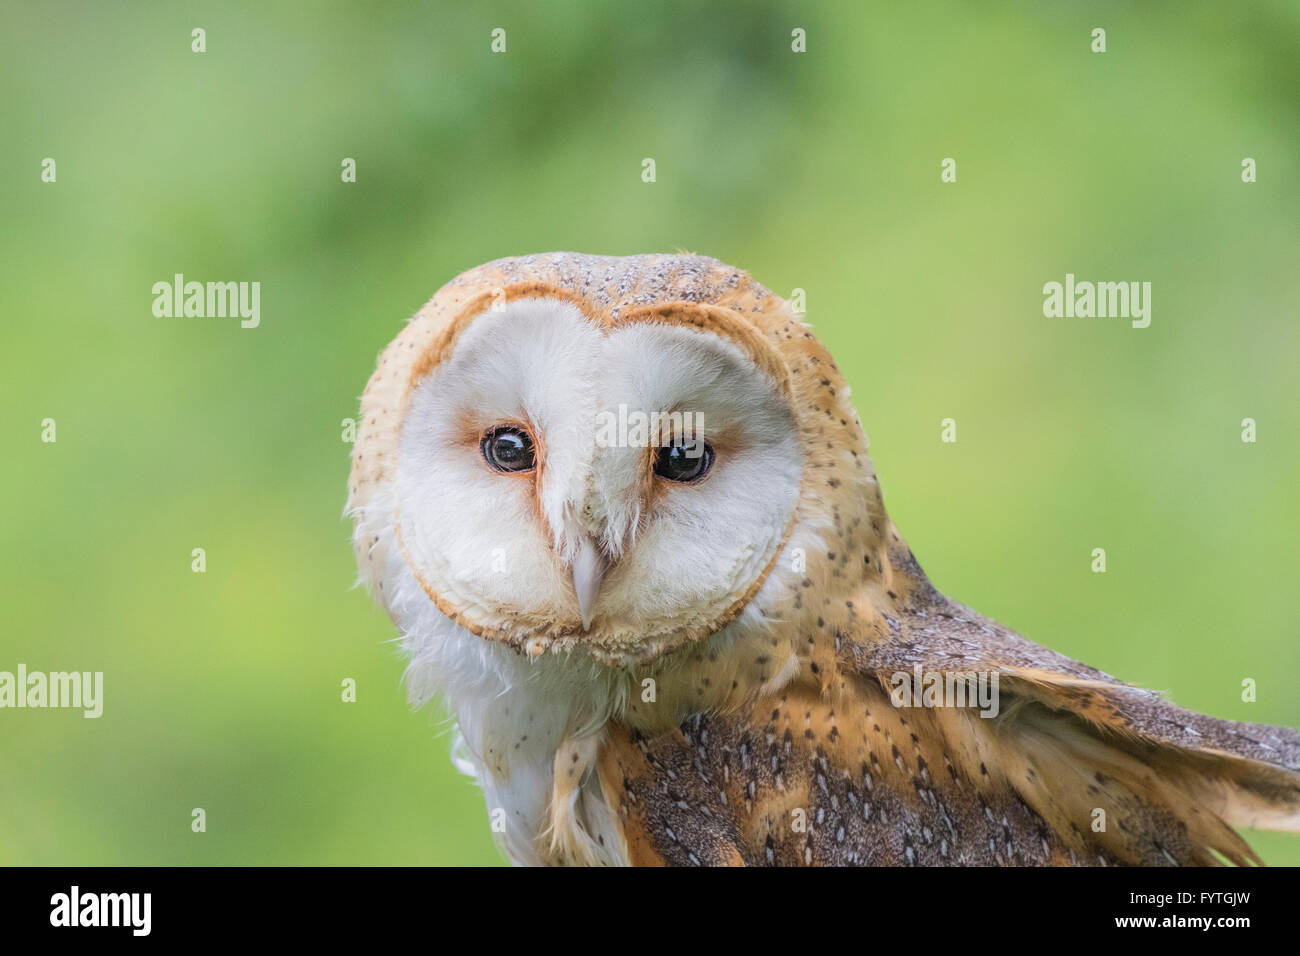 European Barn Owl, a Rescue bird, rehabilitated and trained for education and conversation purposes. Stock Photo